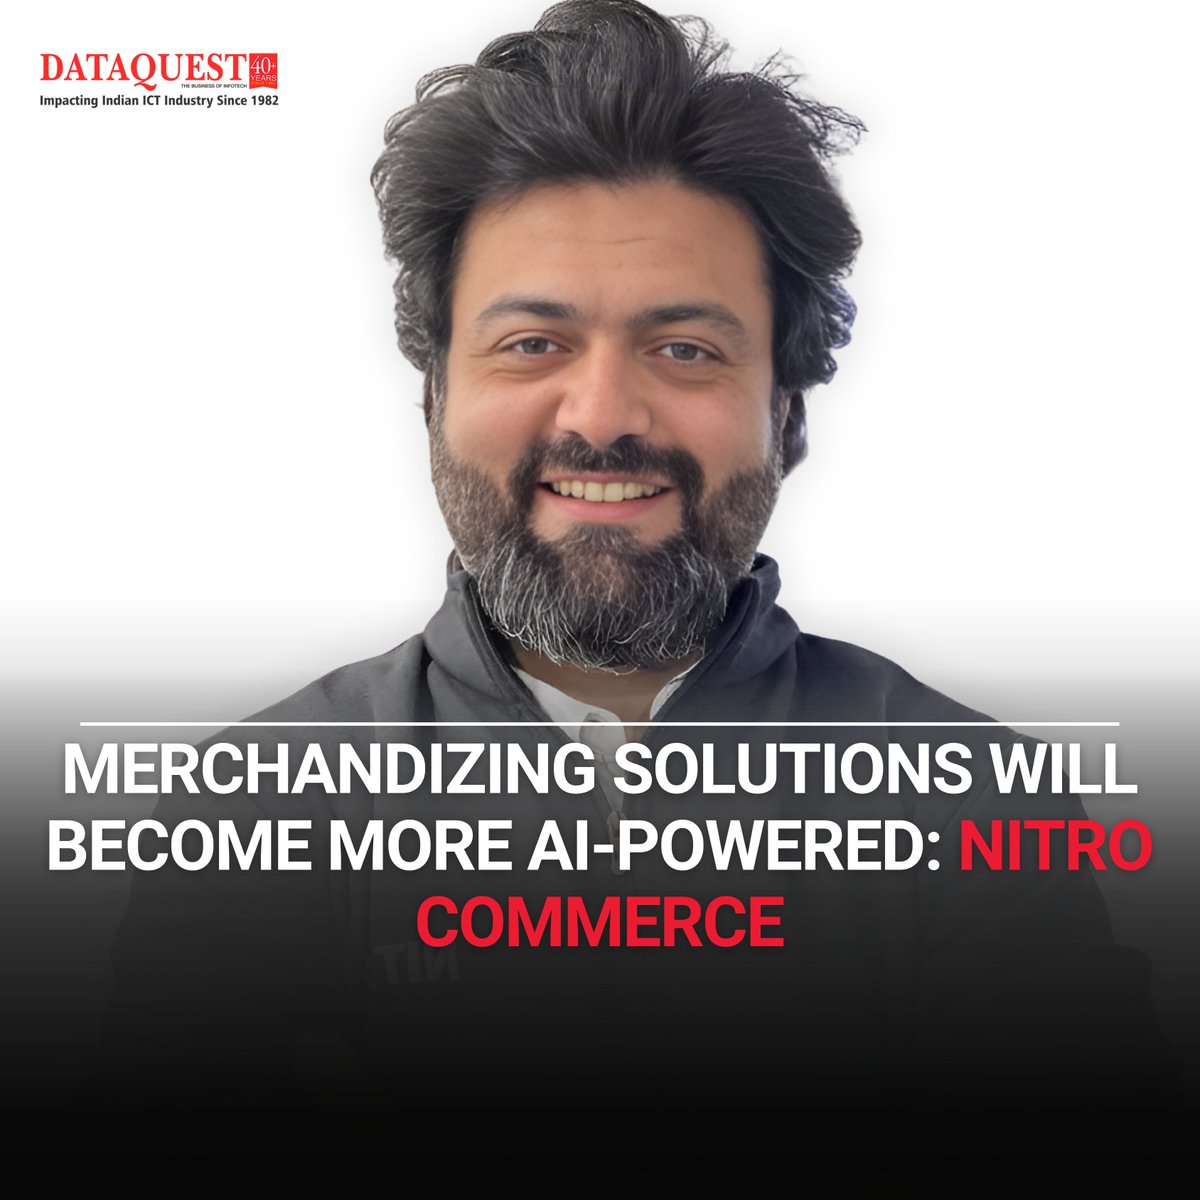 Explore how AI is transforming merchandising with insights from Nitro Commerce! 🚀 

Read the full article now:dqindia.com/interview/merc…

#AITechnology #Merchandising #RetailInnovation #Ecommerce #FutureOfRetail